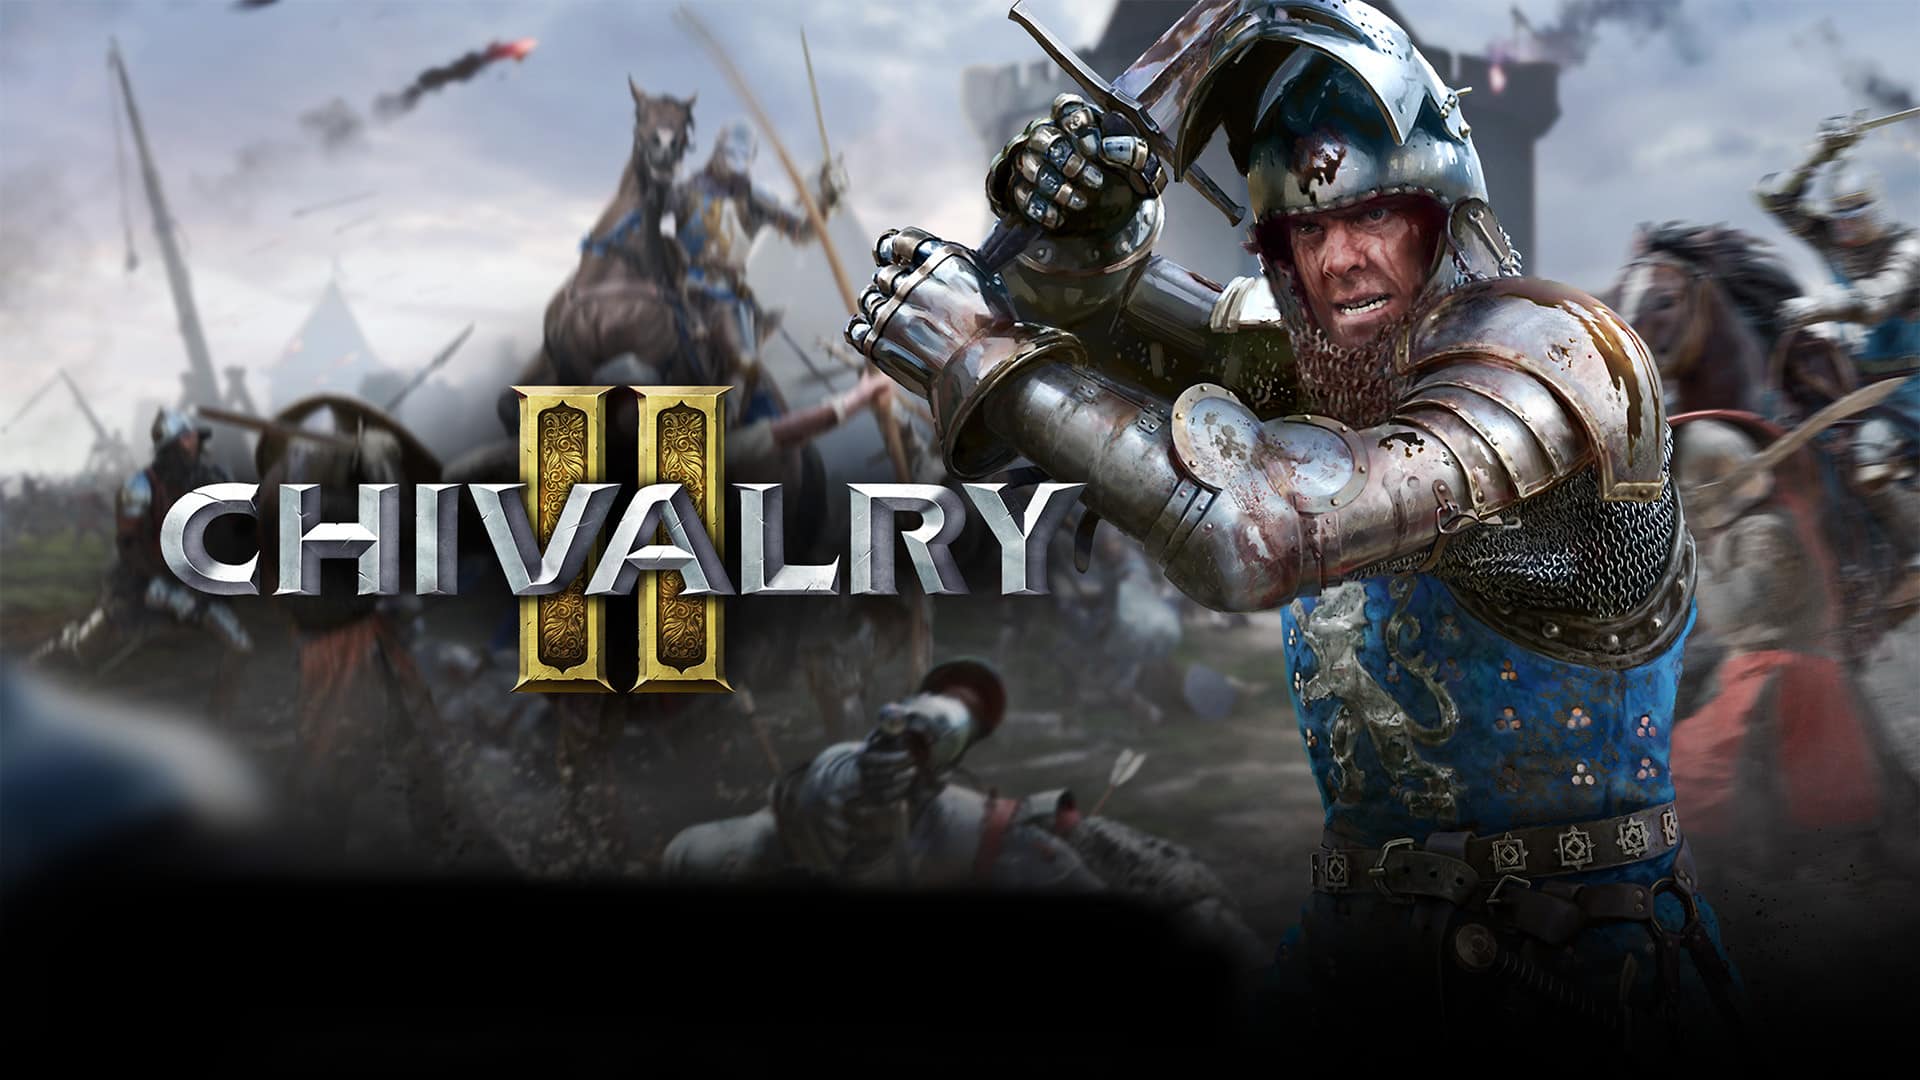 chivalry 2 game pass download free